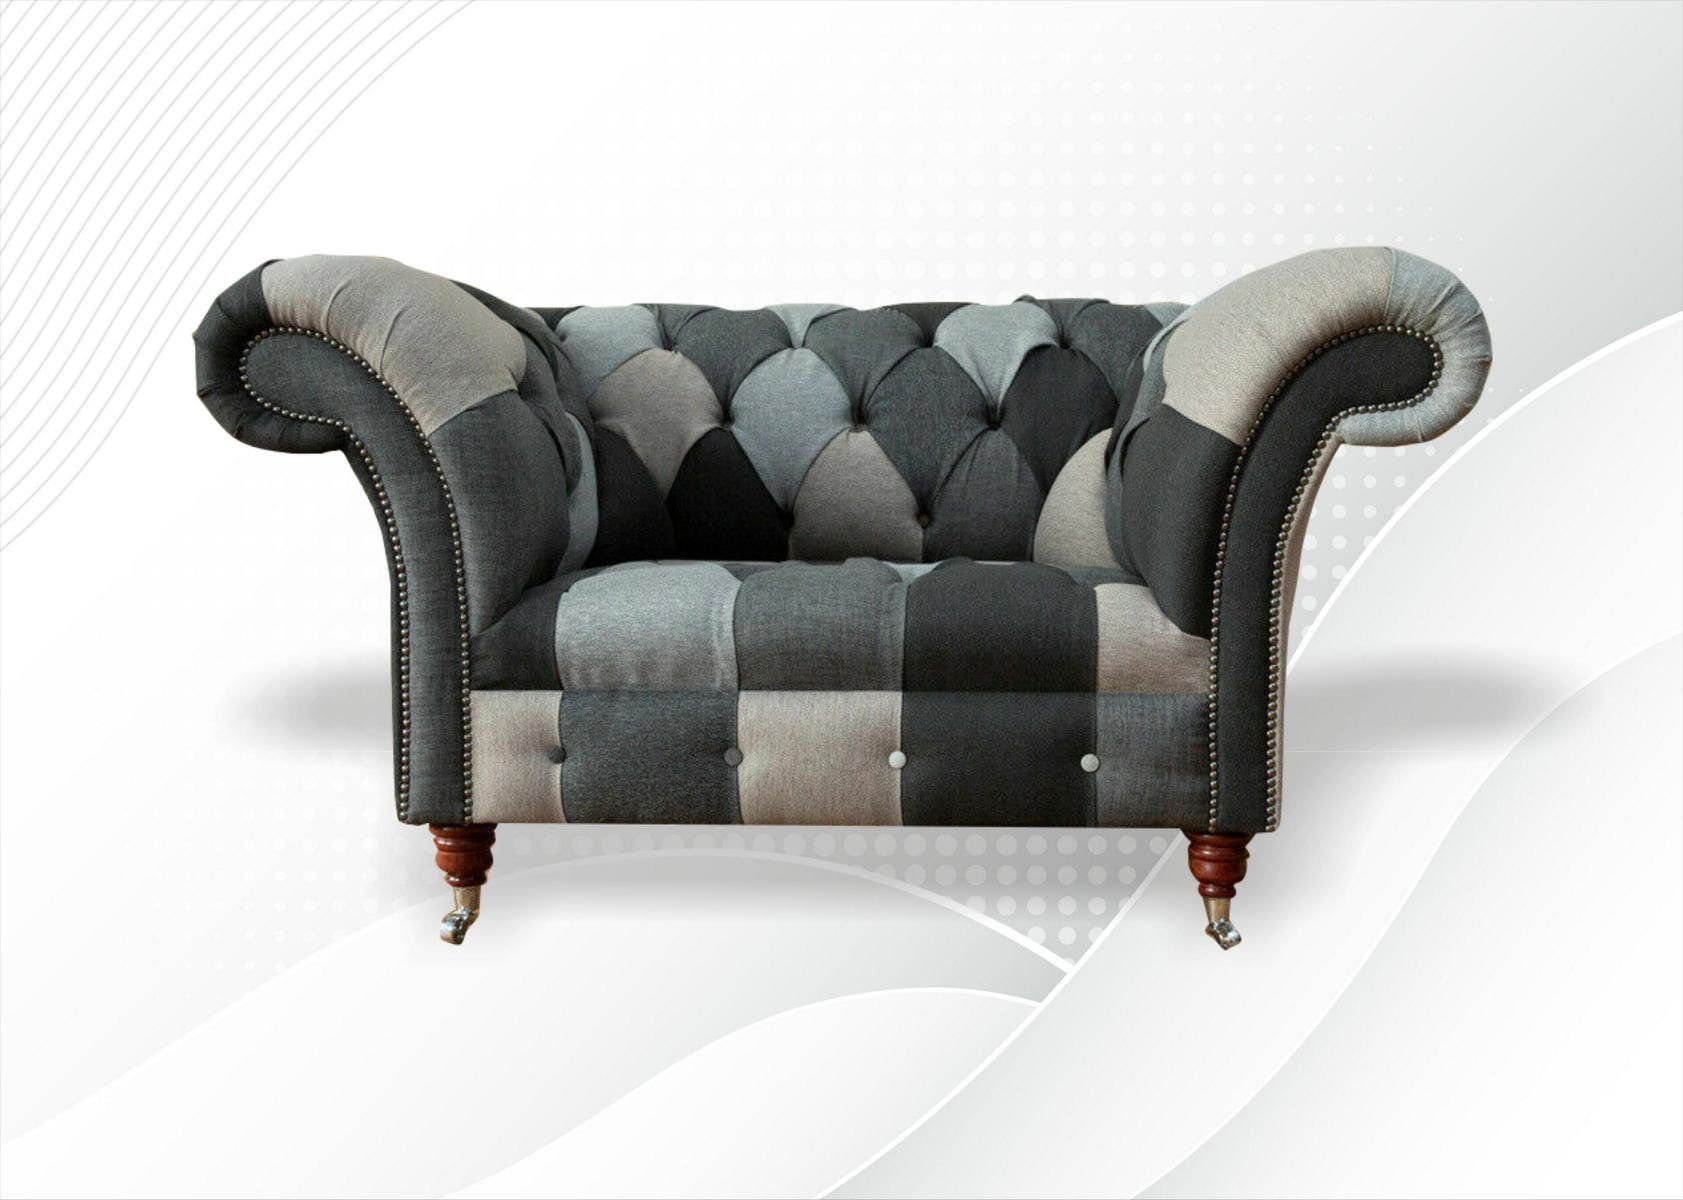 Sitzer Stoff Polster Couch 1.5 Designer Sofa Sofa, Made Sessel in JVmoebel Europe Luxus Chesterfield